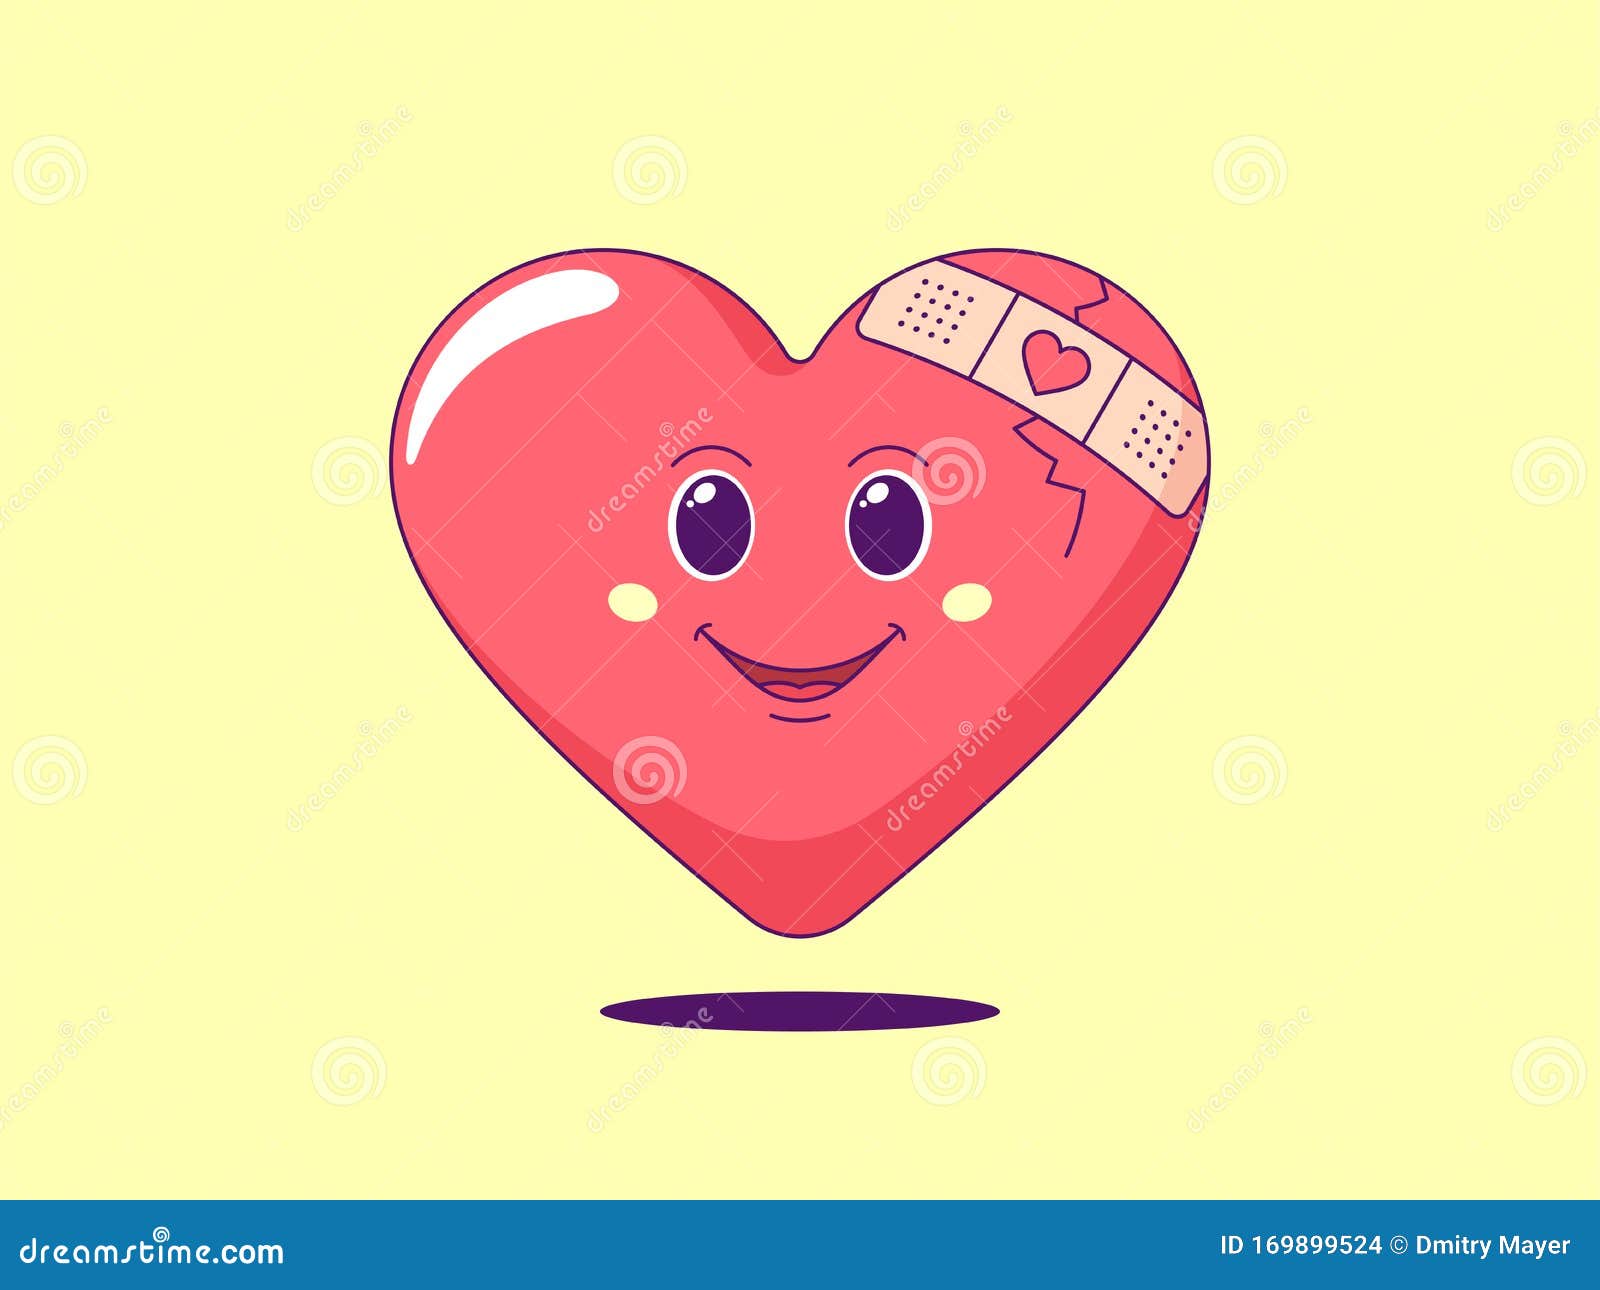 Cartoon Red Heart with Patch on the Crack. Cute and Friendly Character ...